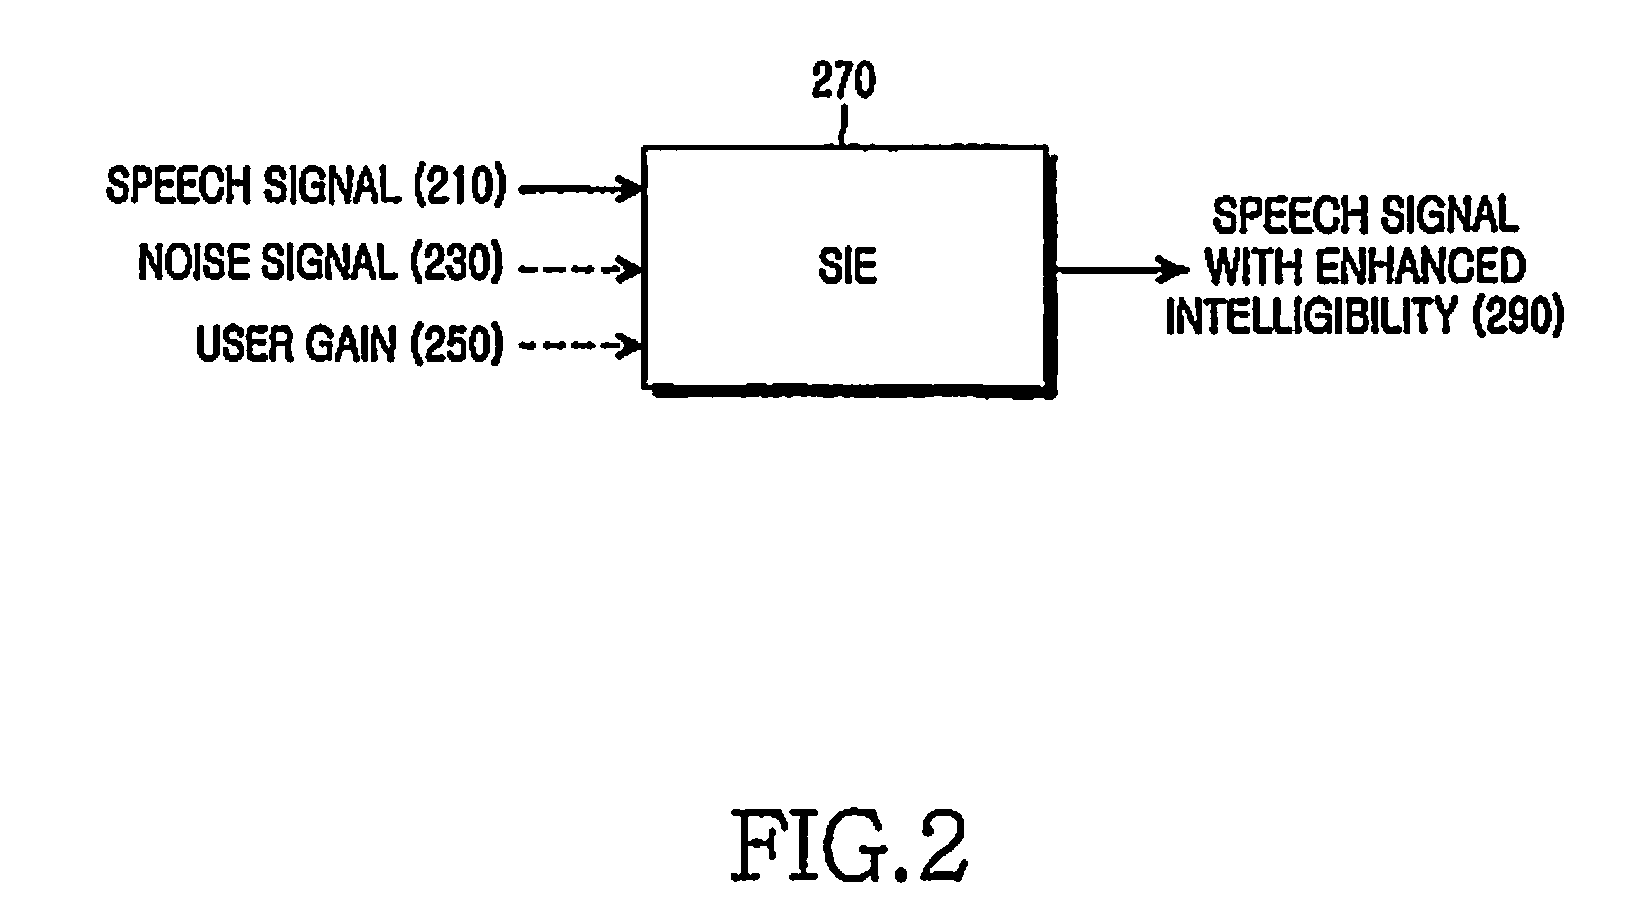 Apparatus and method for enhancing speech intelligibility in a mobile terminal